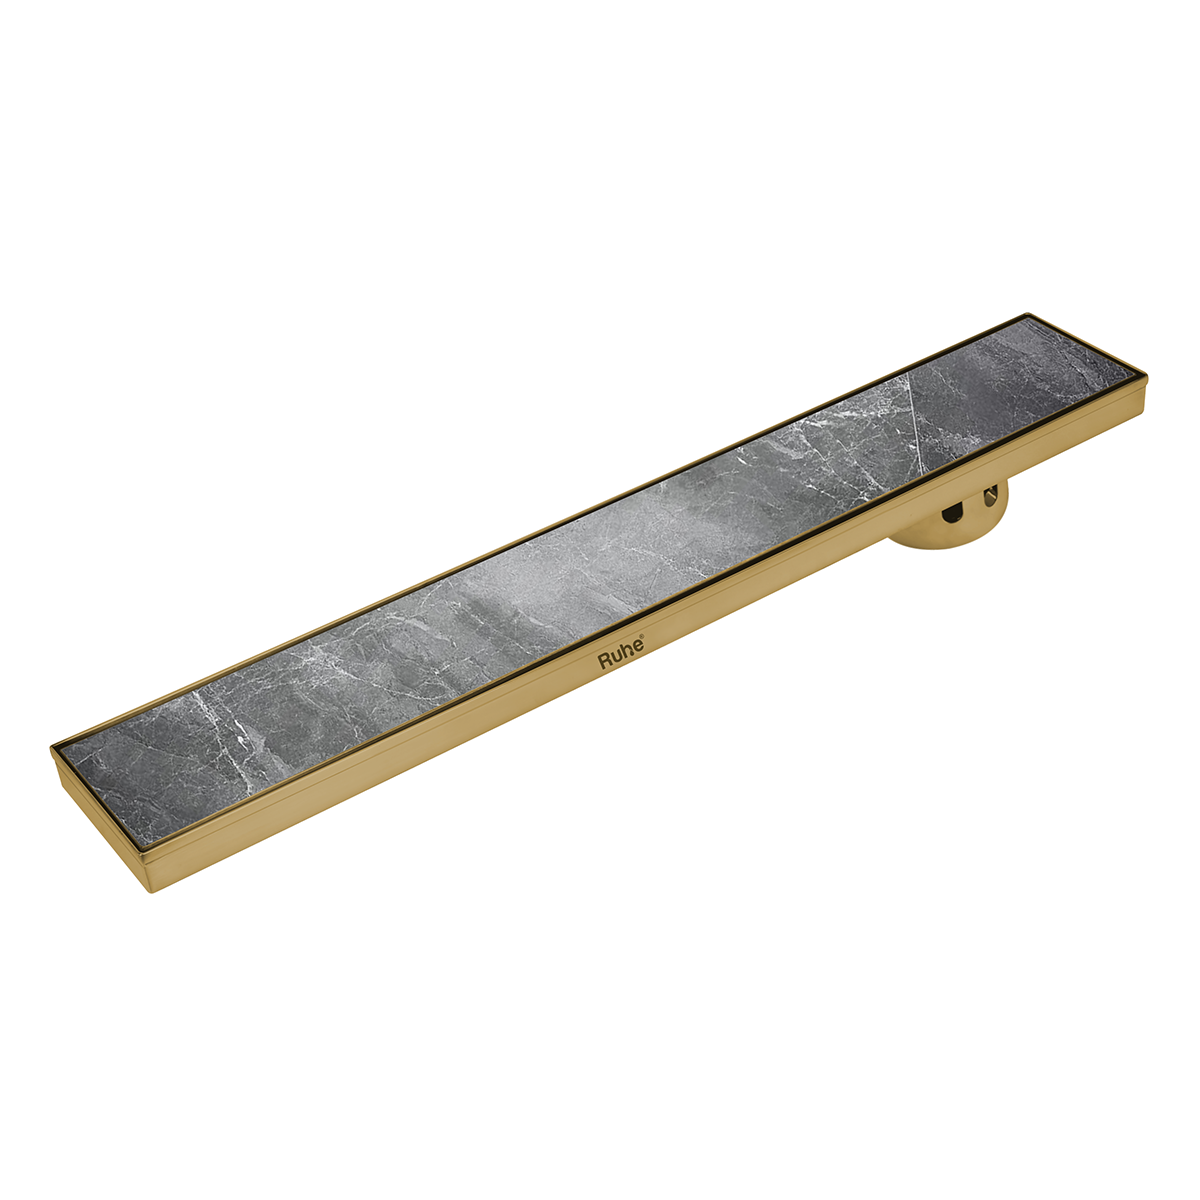 Marble Insert Shower Drain Channel (48 x 5 Inches) YELLOW GOLD PVD Coated